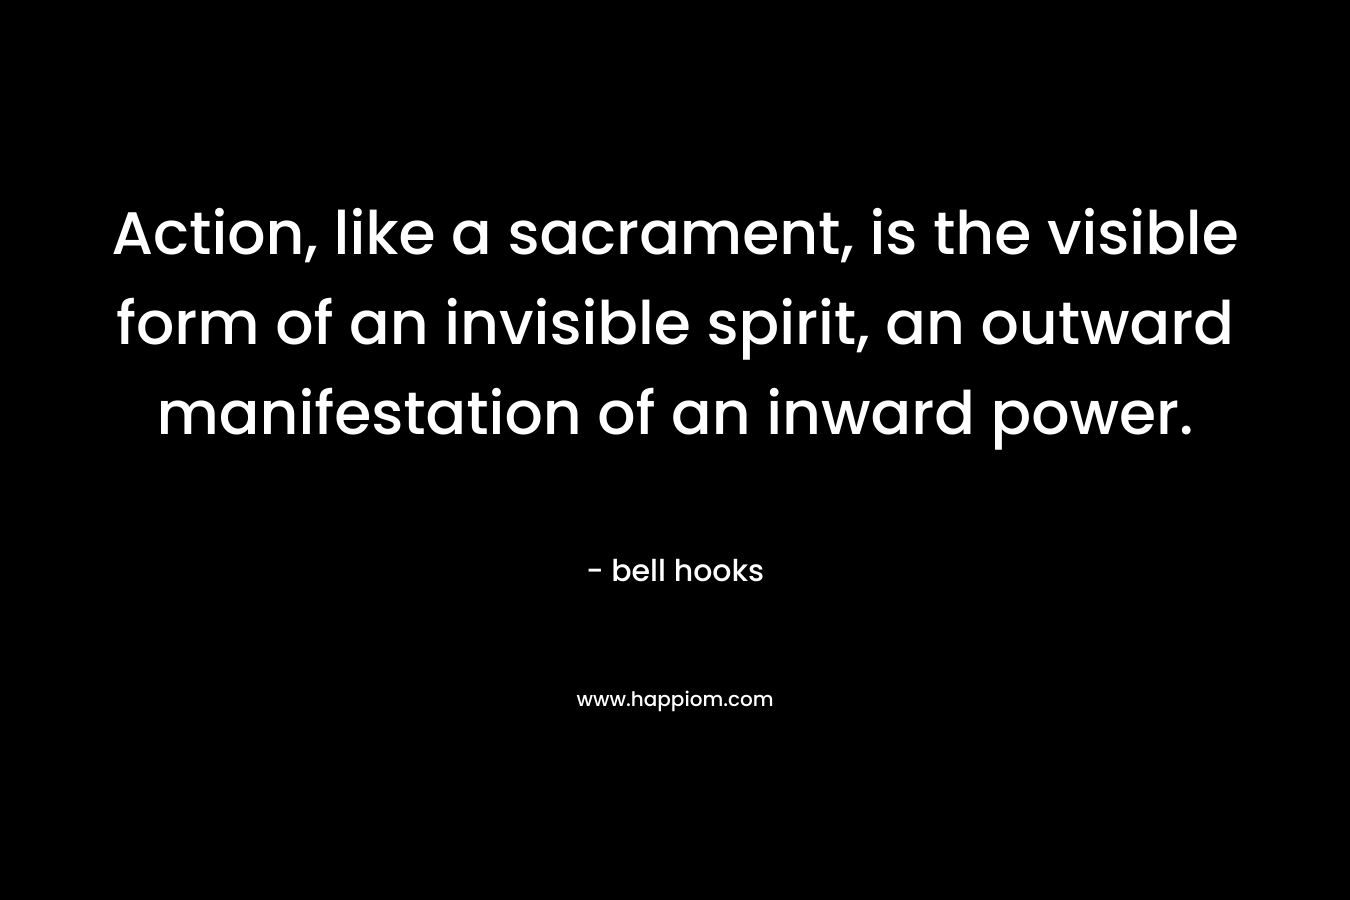 Action, like a sacrament, is the visible form of an invisible spirit, an outward manifestation of an inward power.